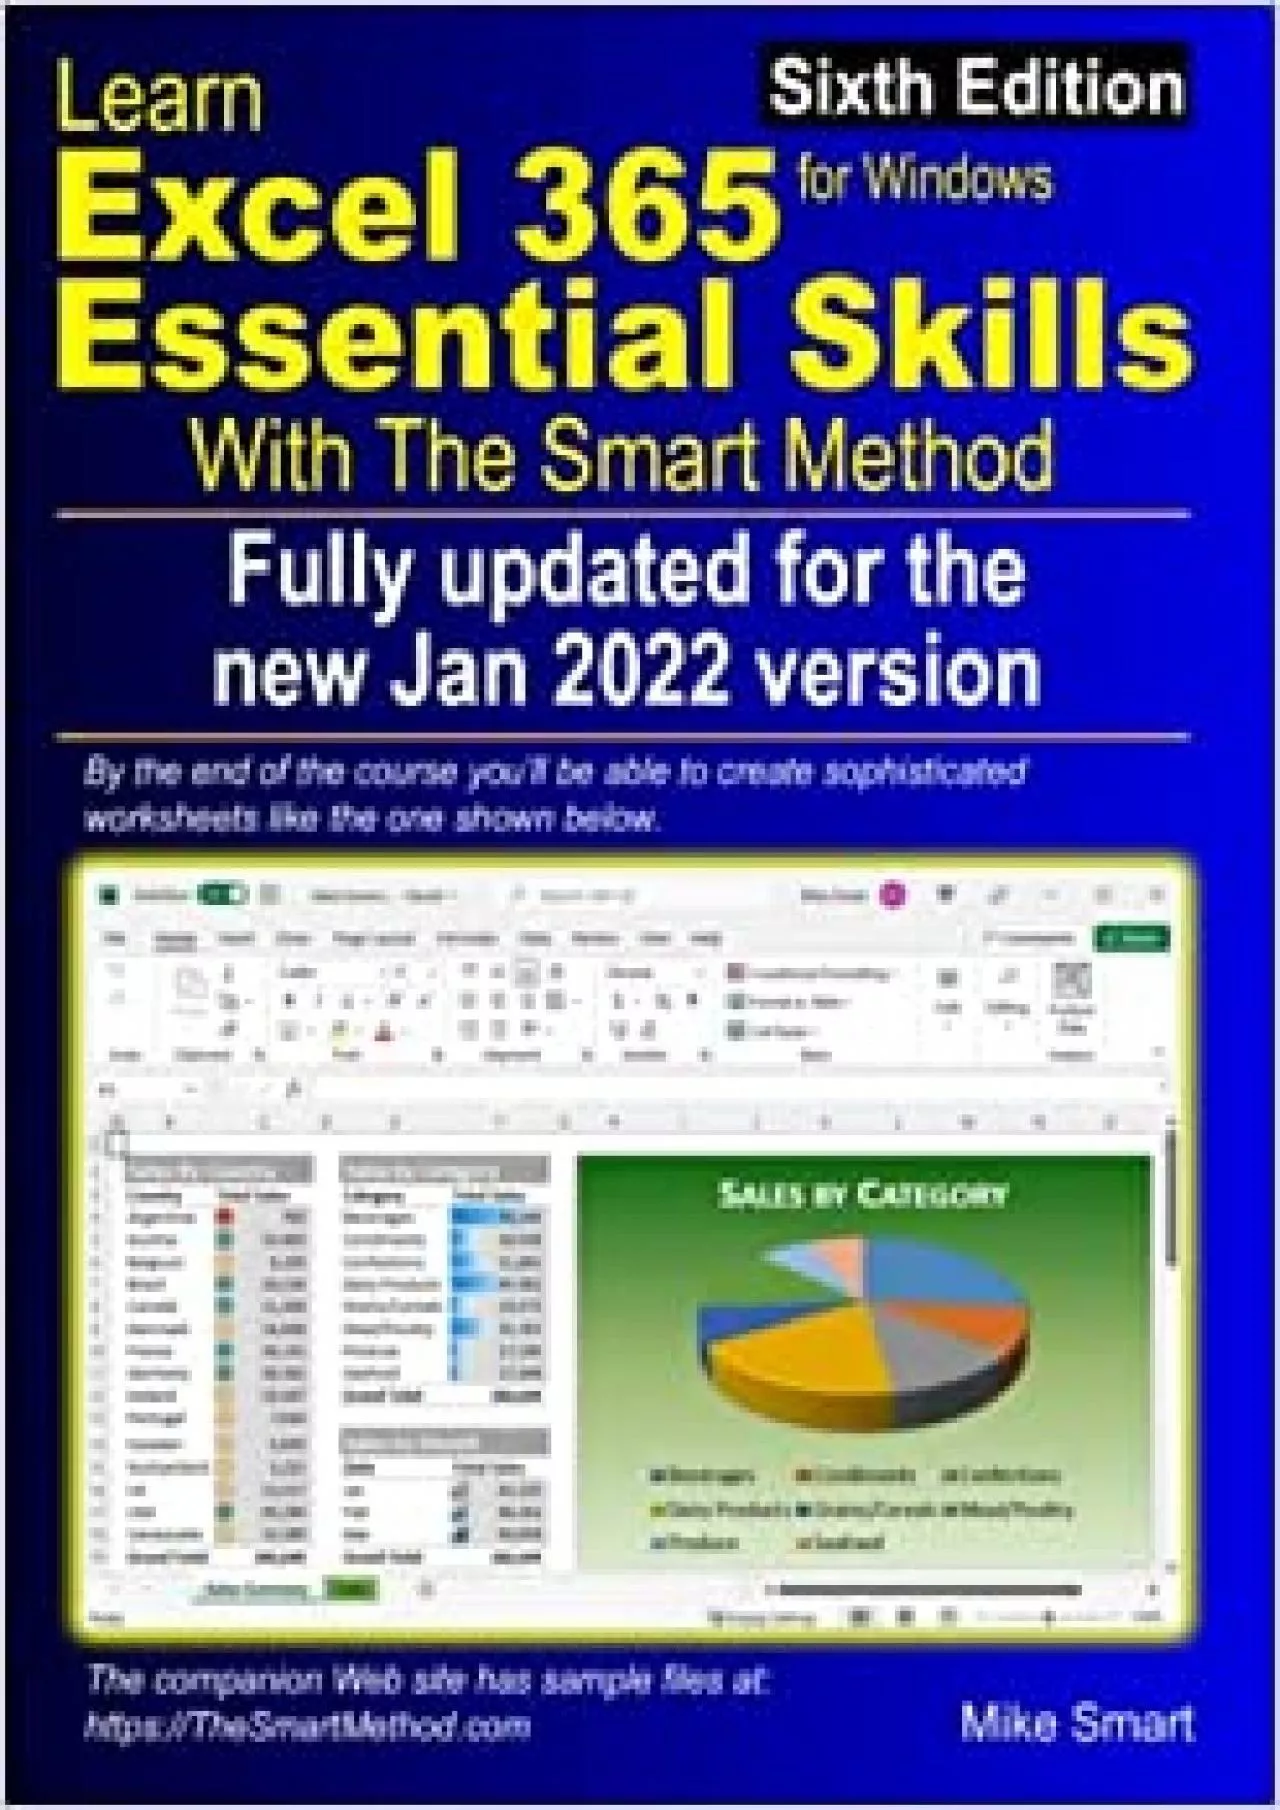 Learn Excel 365 Essential Skills with The Smart Method: Sixth Edition: fully updated for